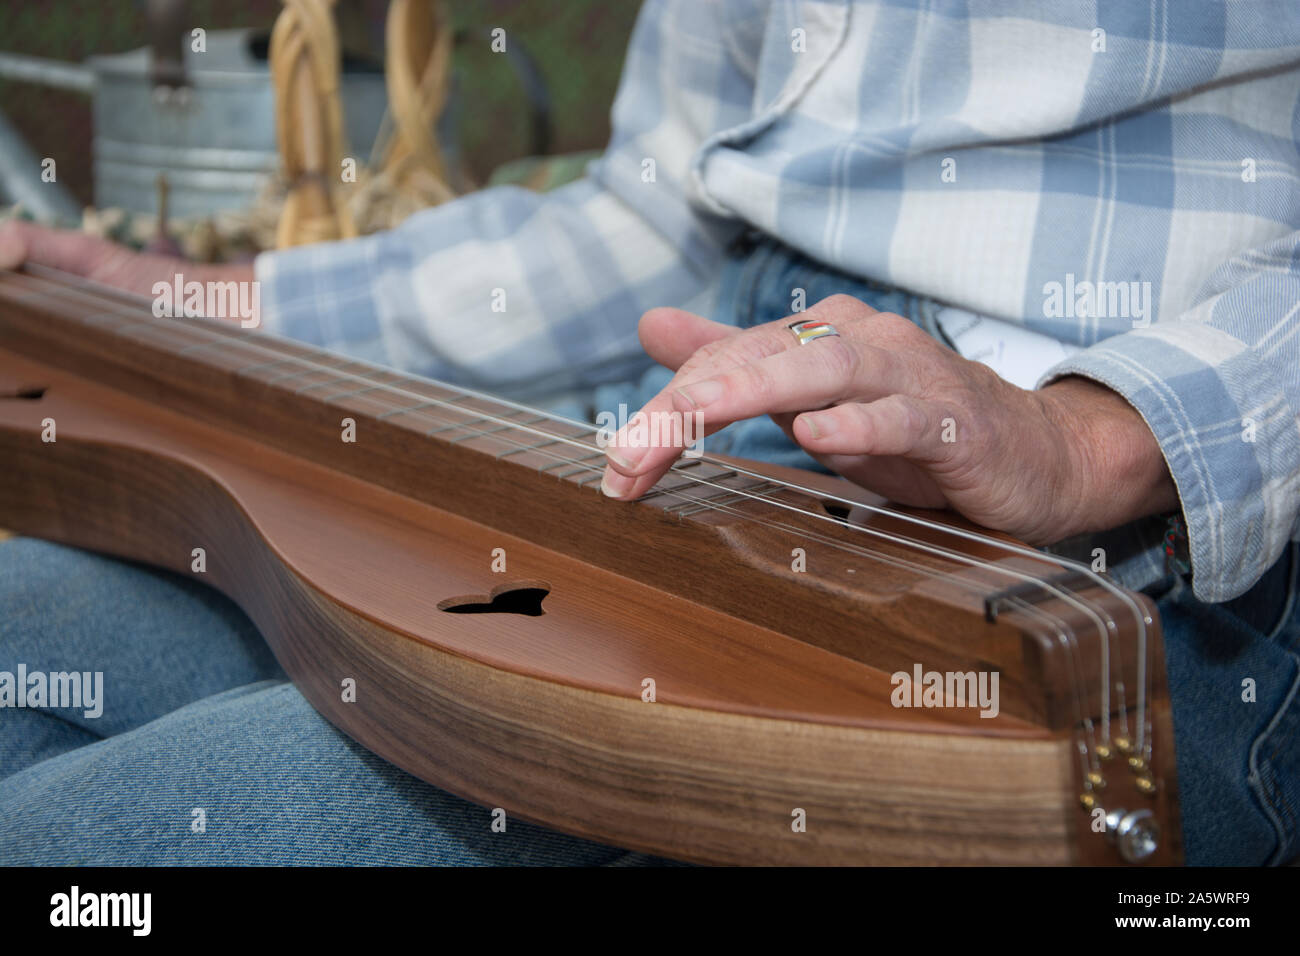 A woman in western attire learns to play the dulcimer on the bed of a flat pick up truck in a rural area at harvest time. Stock Photo